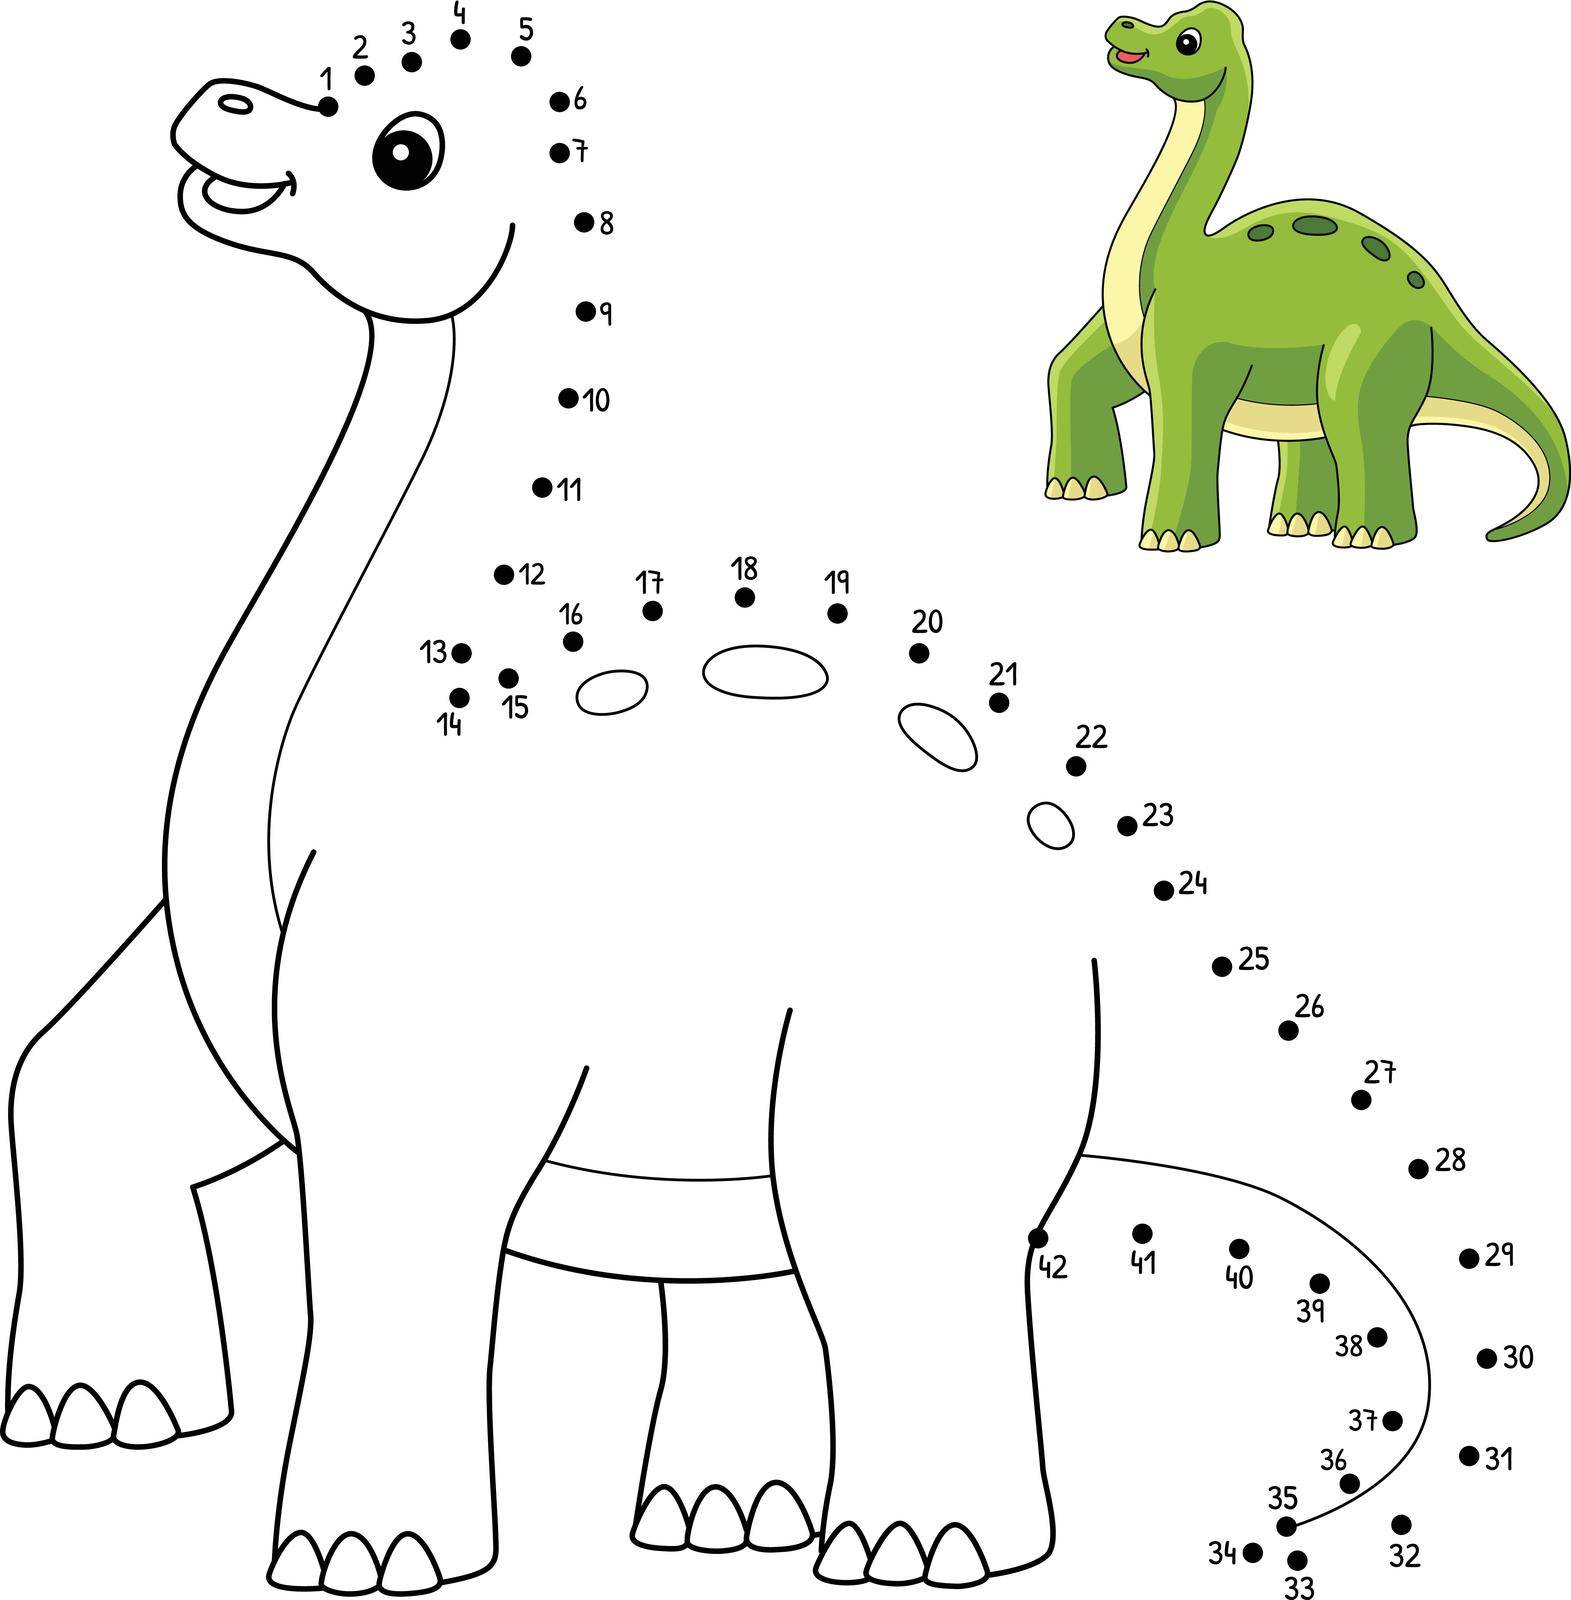 A cute and funny connect the dots coloring page of a Brachiosaurus. Provides hours of coloring fun for children. To color, this page is very easy. Suitable for little kids and toddlers.